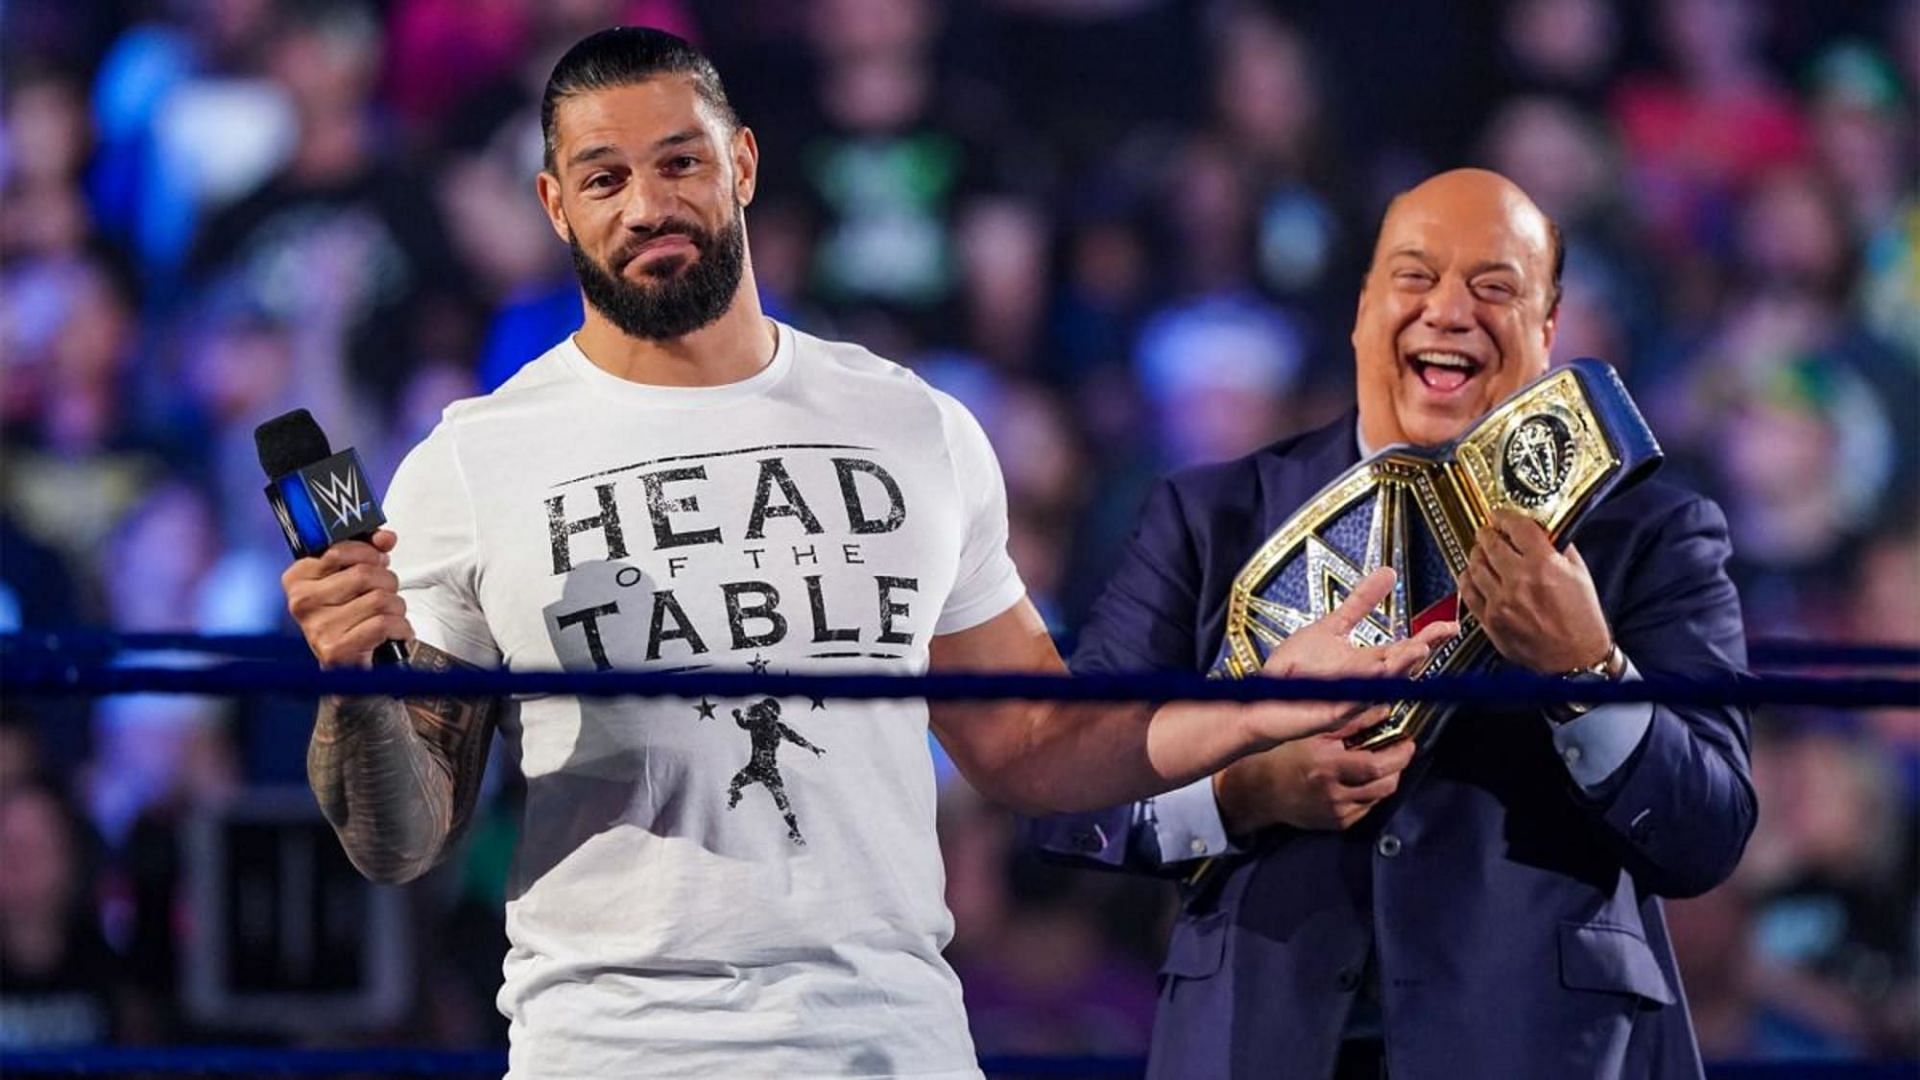 Roman Reigns may have provided an interesting update regarding his title run